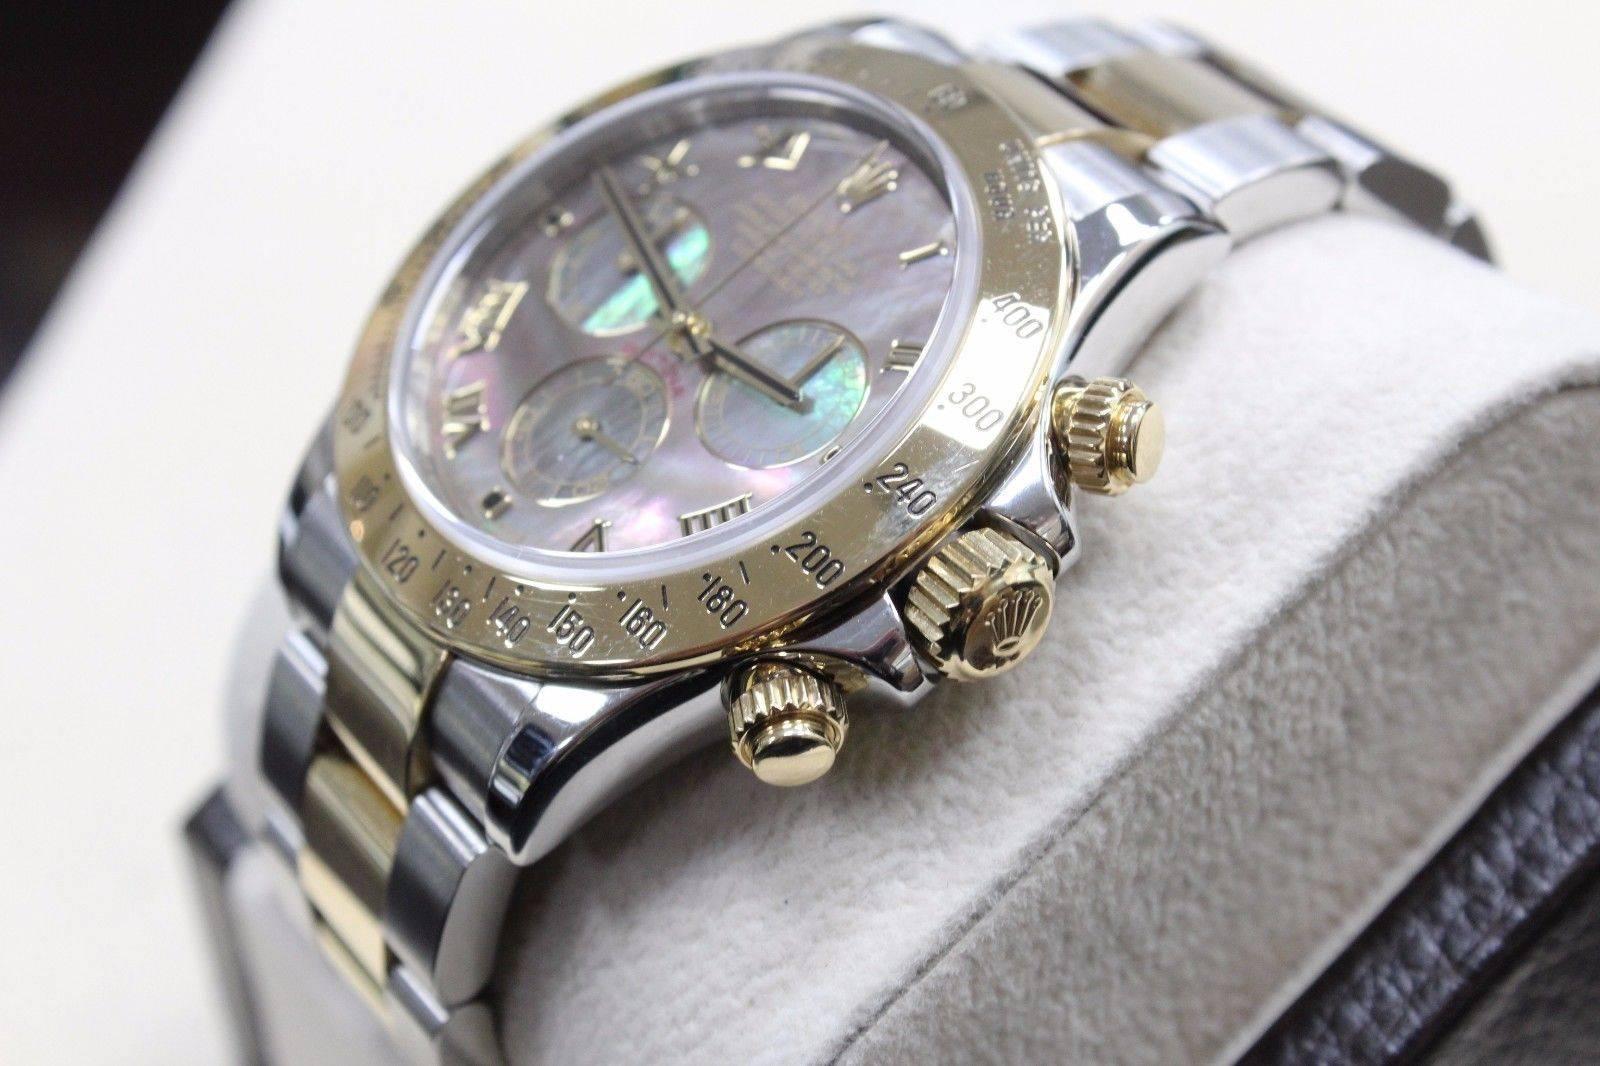 Men's 2016 Rolex Daytona 116523 18 Karat Gold and Stainless Black Mother-of-Pearl Dial